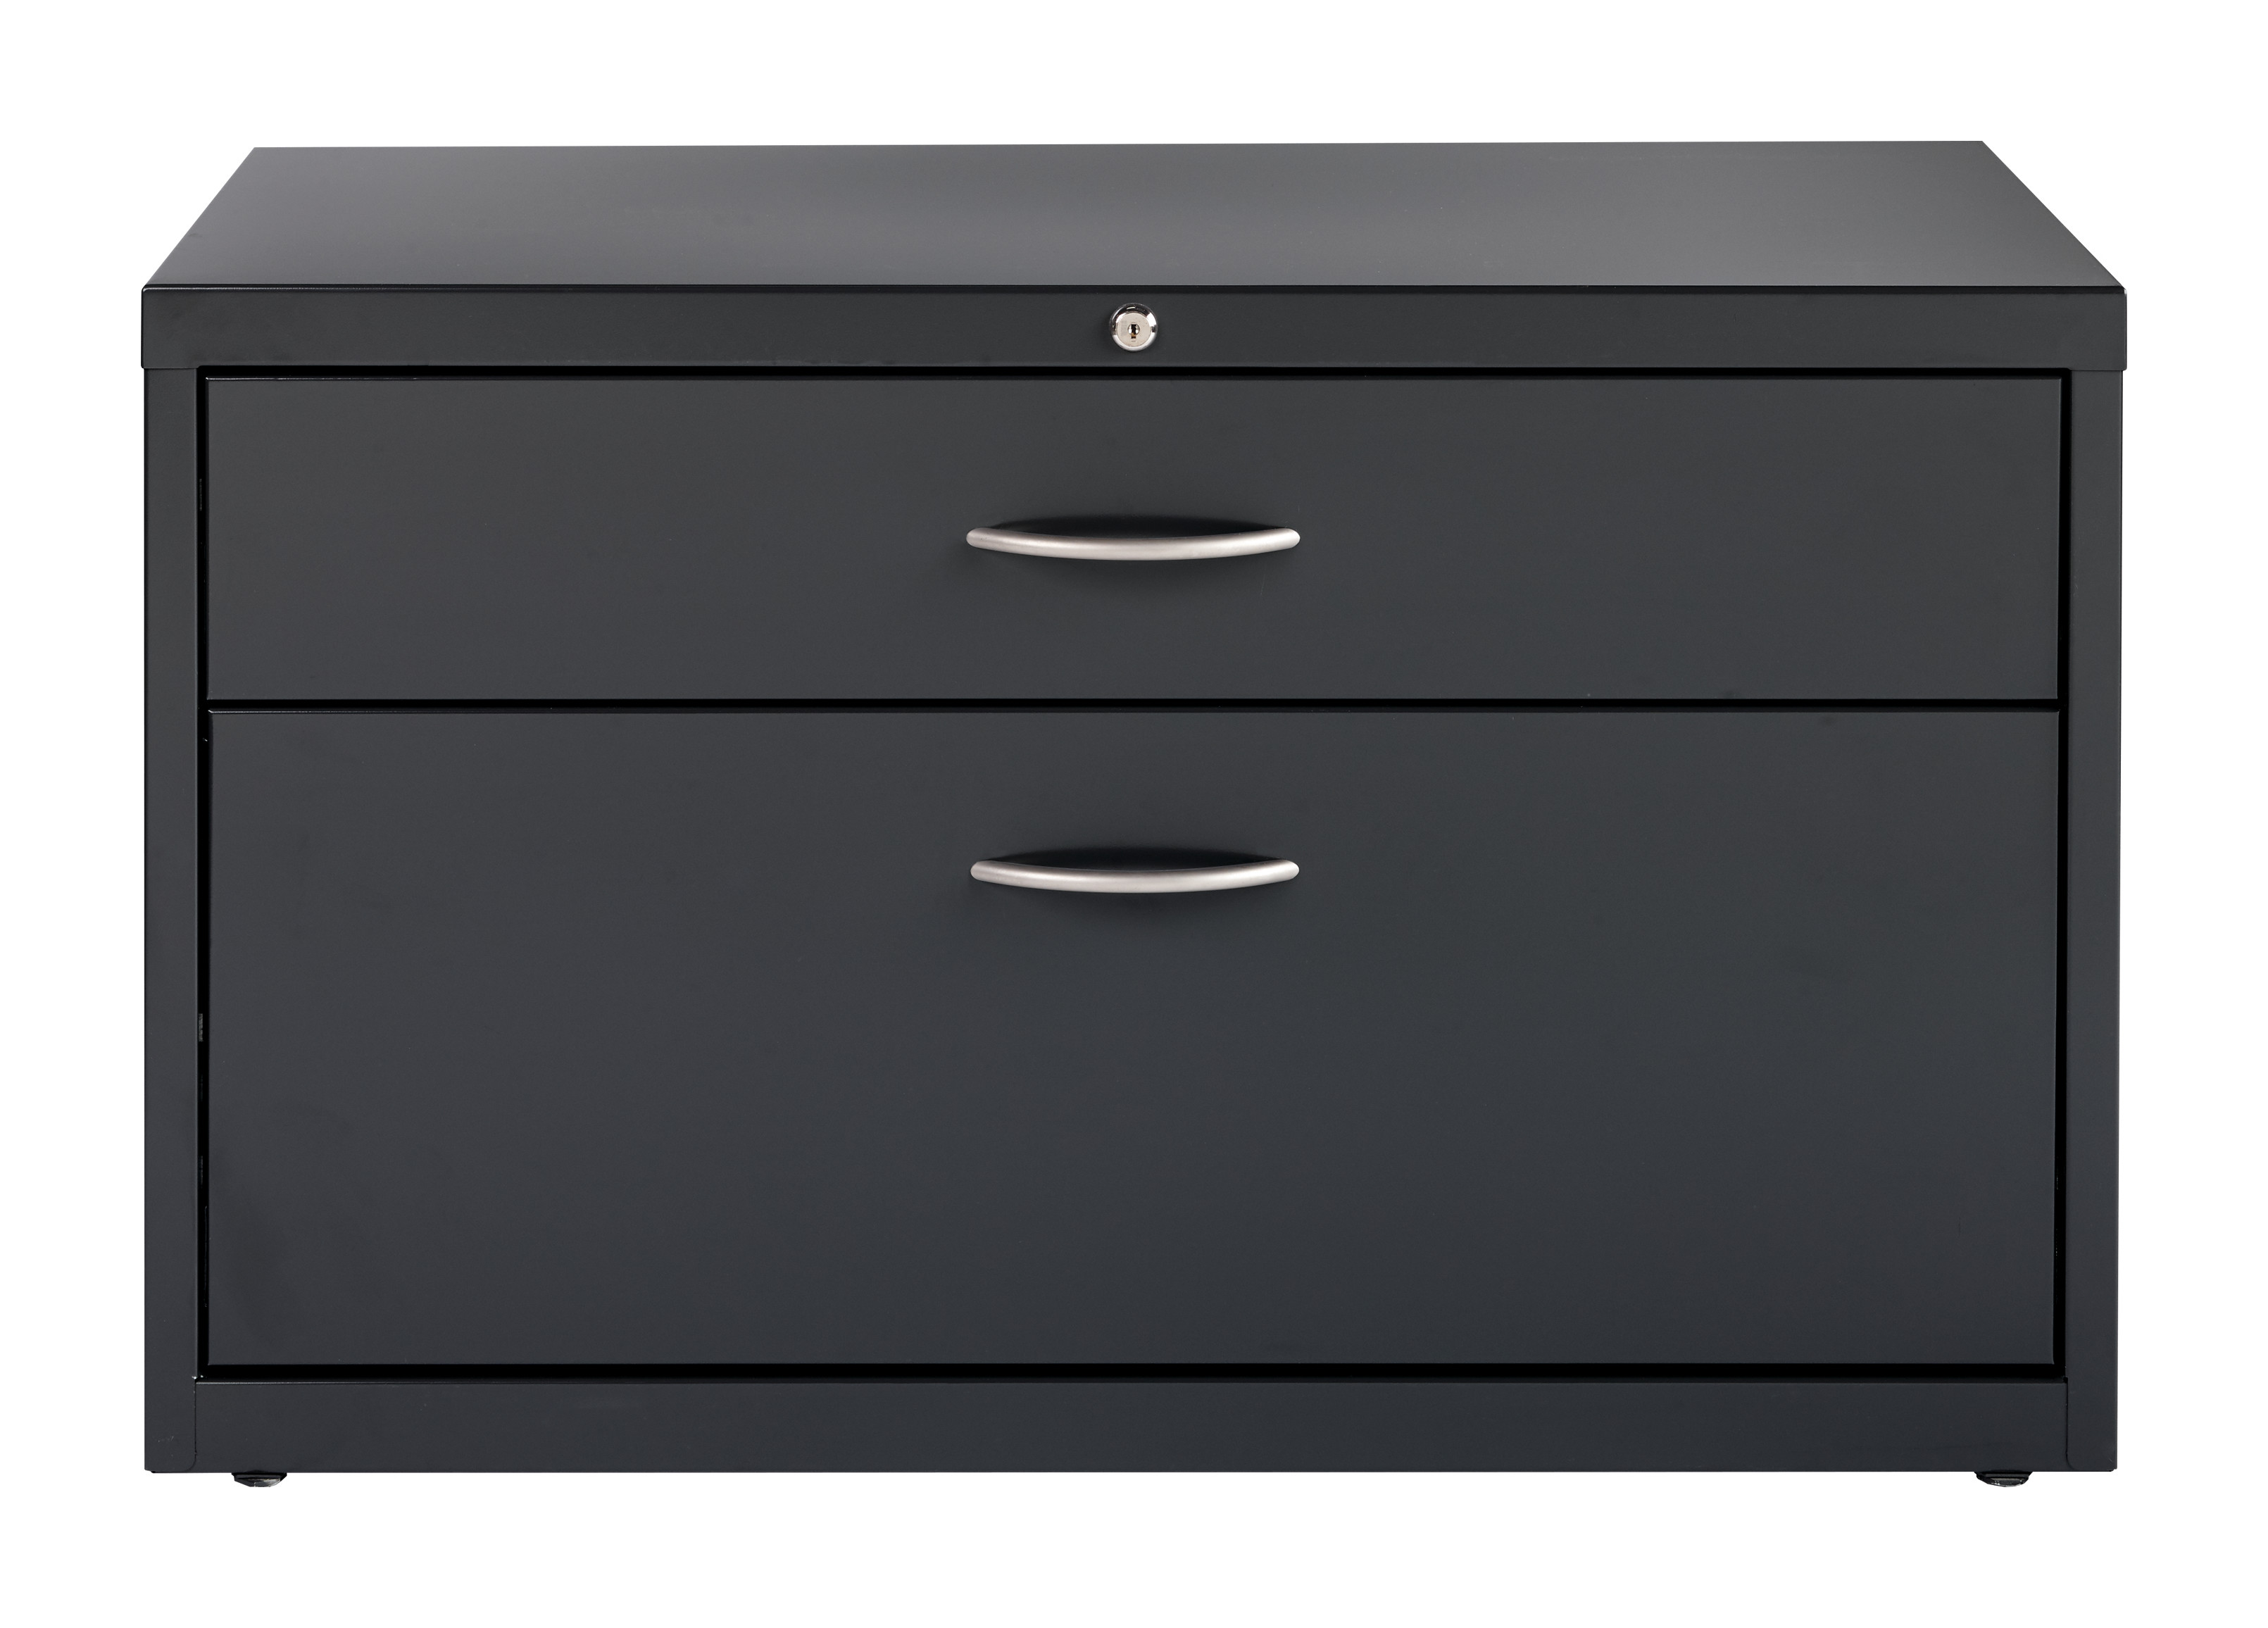 Hirsh Industries B2248135 36 in. Low Credenza with Box & File Drawers - Charcoal - image 2 of 13